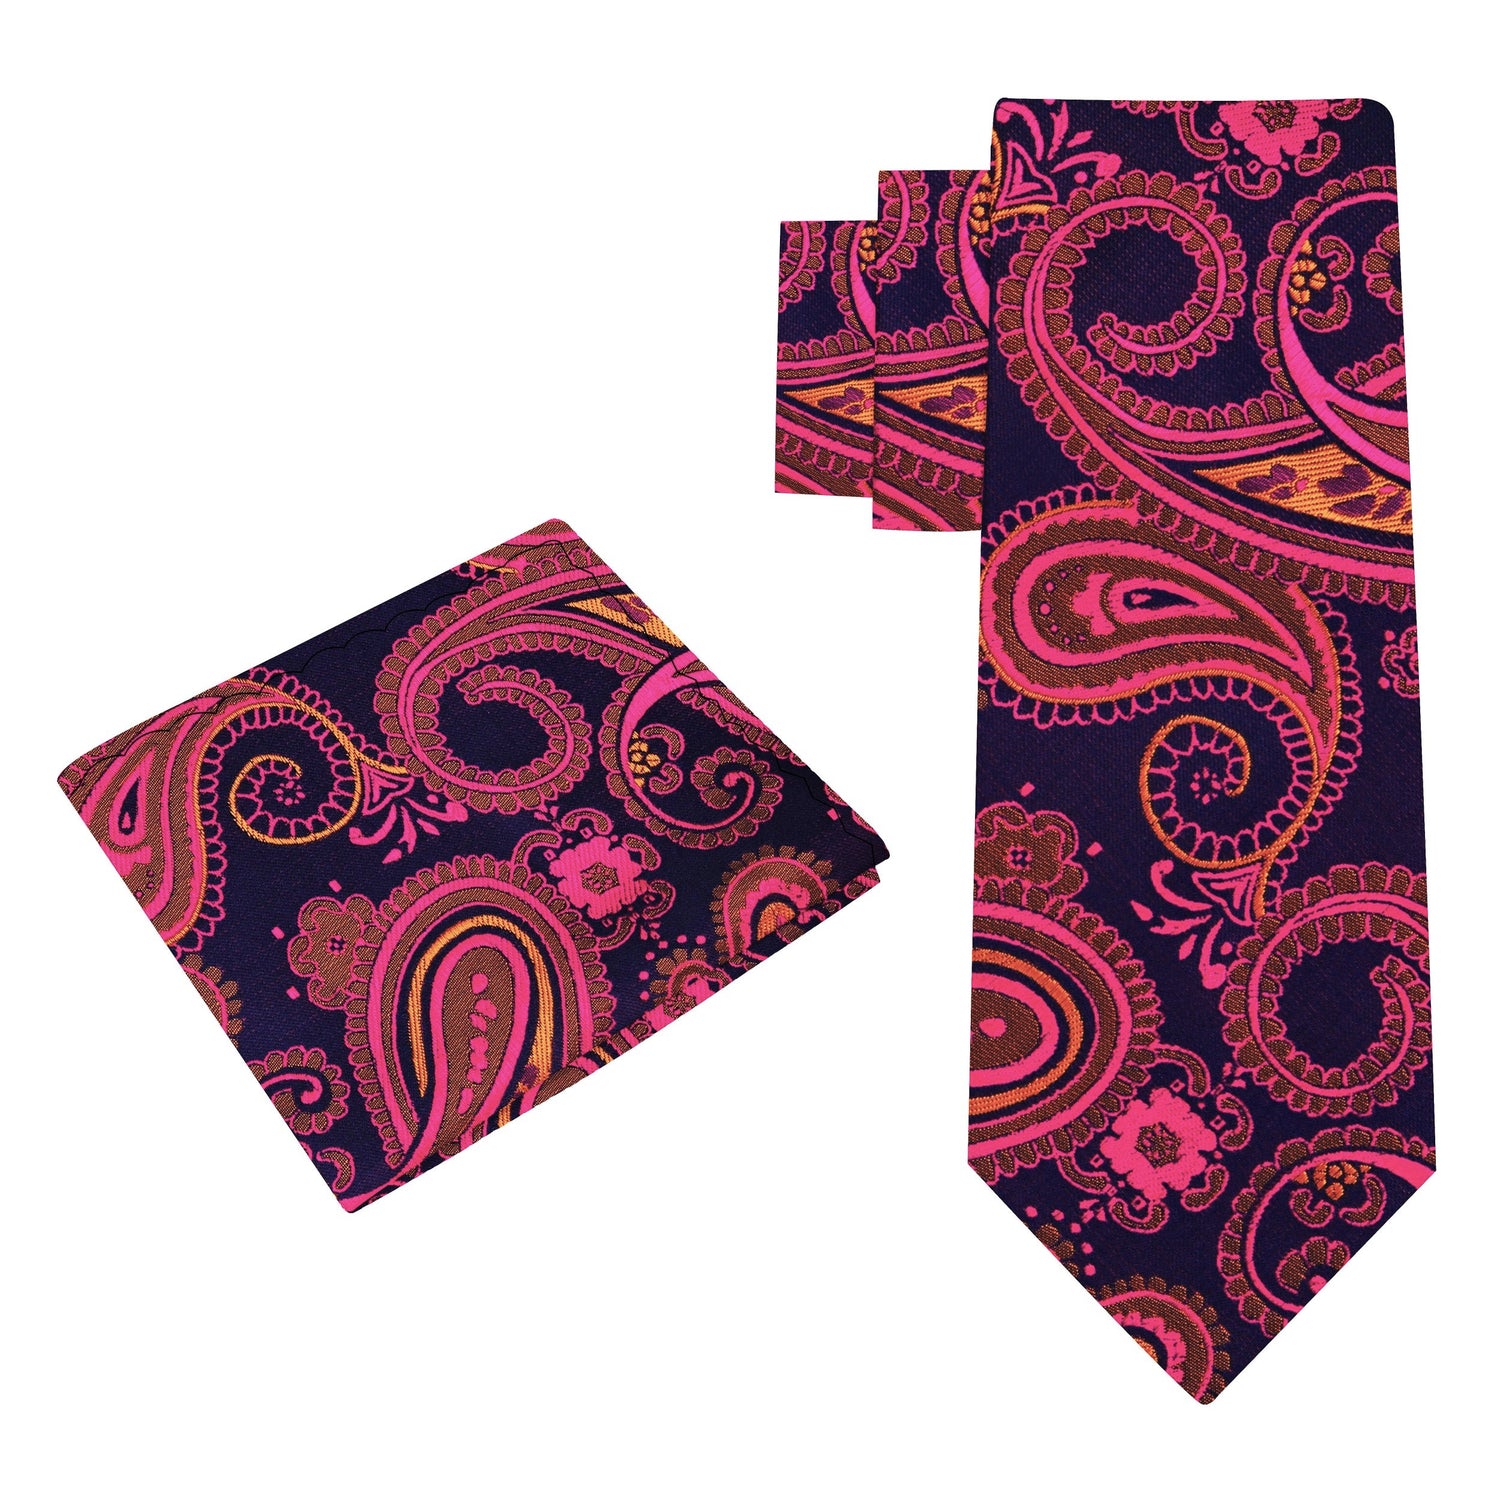 Alt View; A Ruby, Orange Paisley Pattern Silk Necktie, With Matching Pocket Square